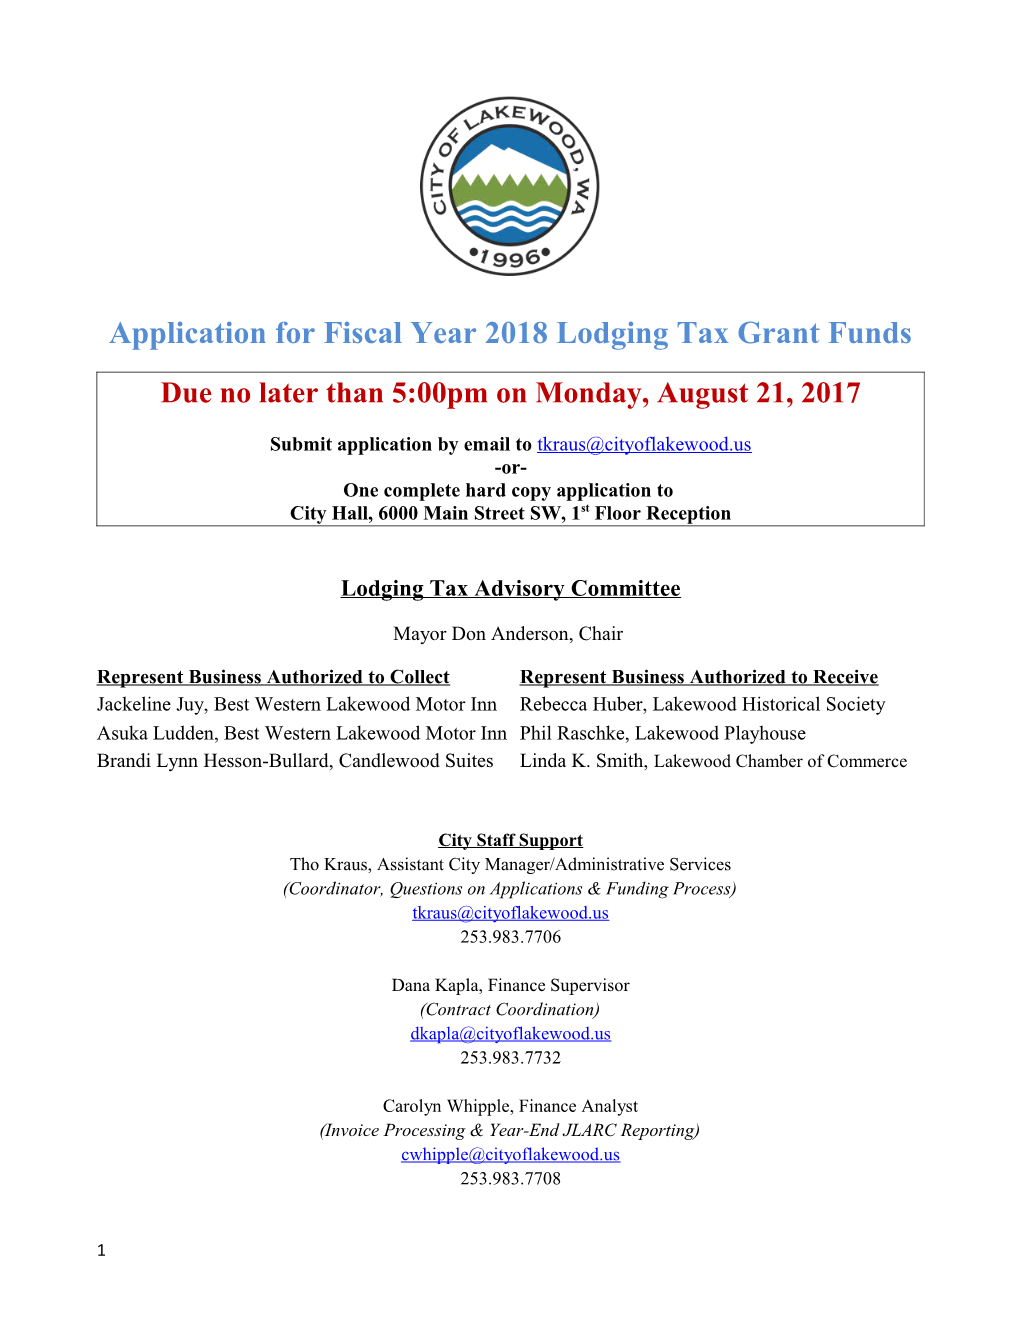 Application for Fiscal Year 2018 Lodging Tax Grant Funds